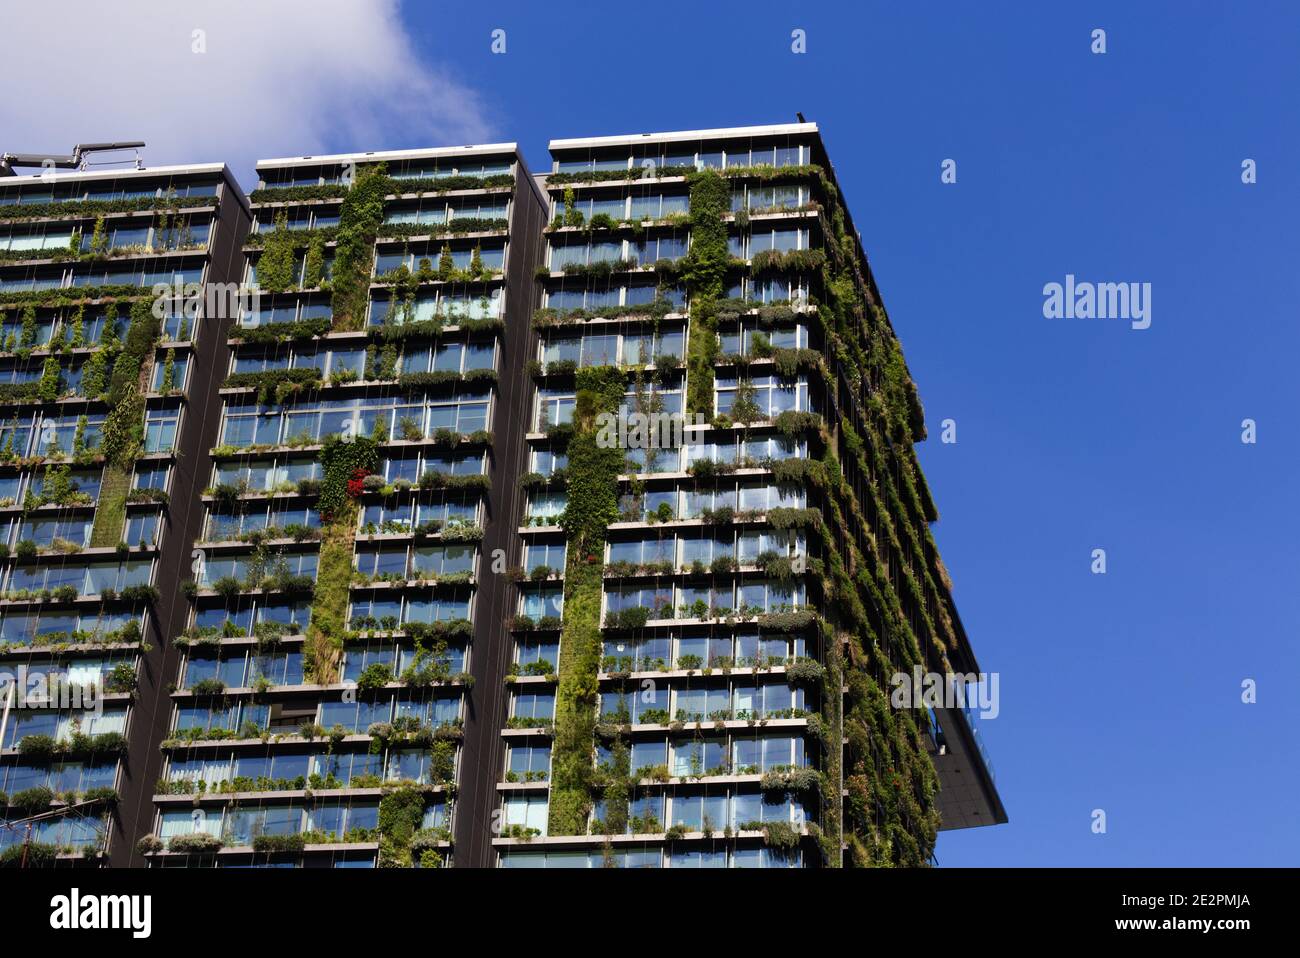 One Central Park is an award-winning mixed-use building featuring vertical hanging gardens located in Ultimo Sydney New South Wales Australia Stock Photo